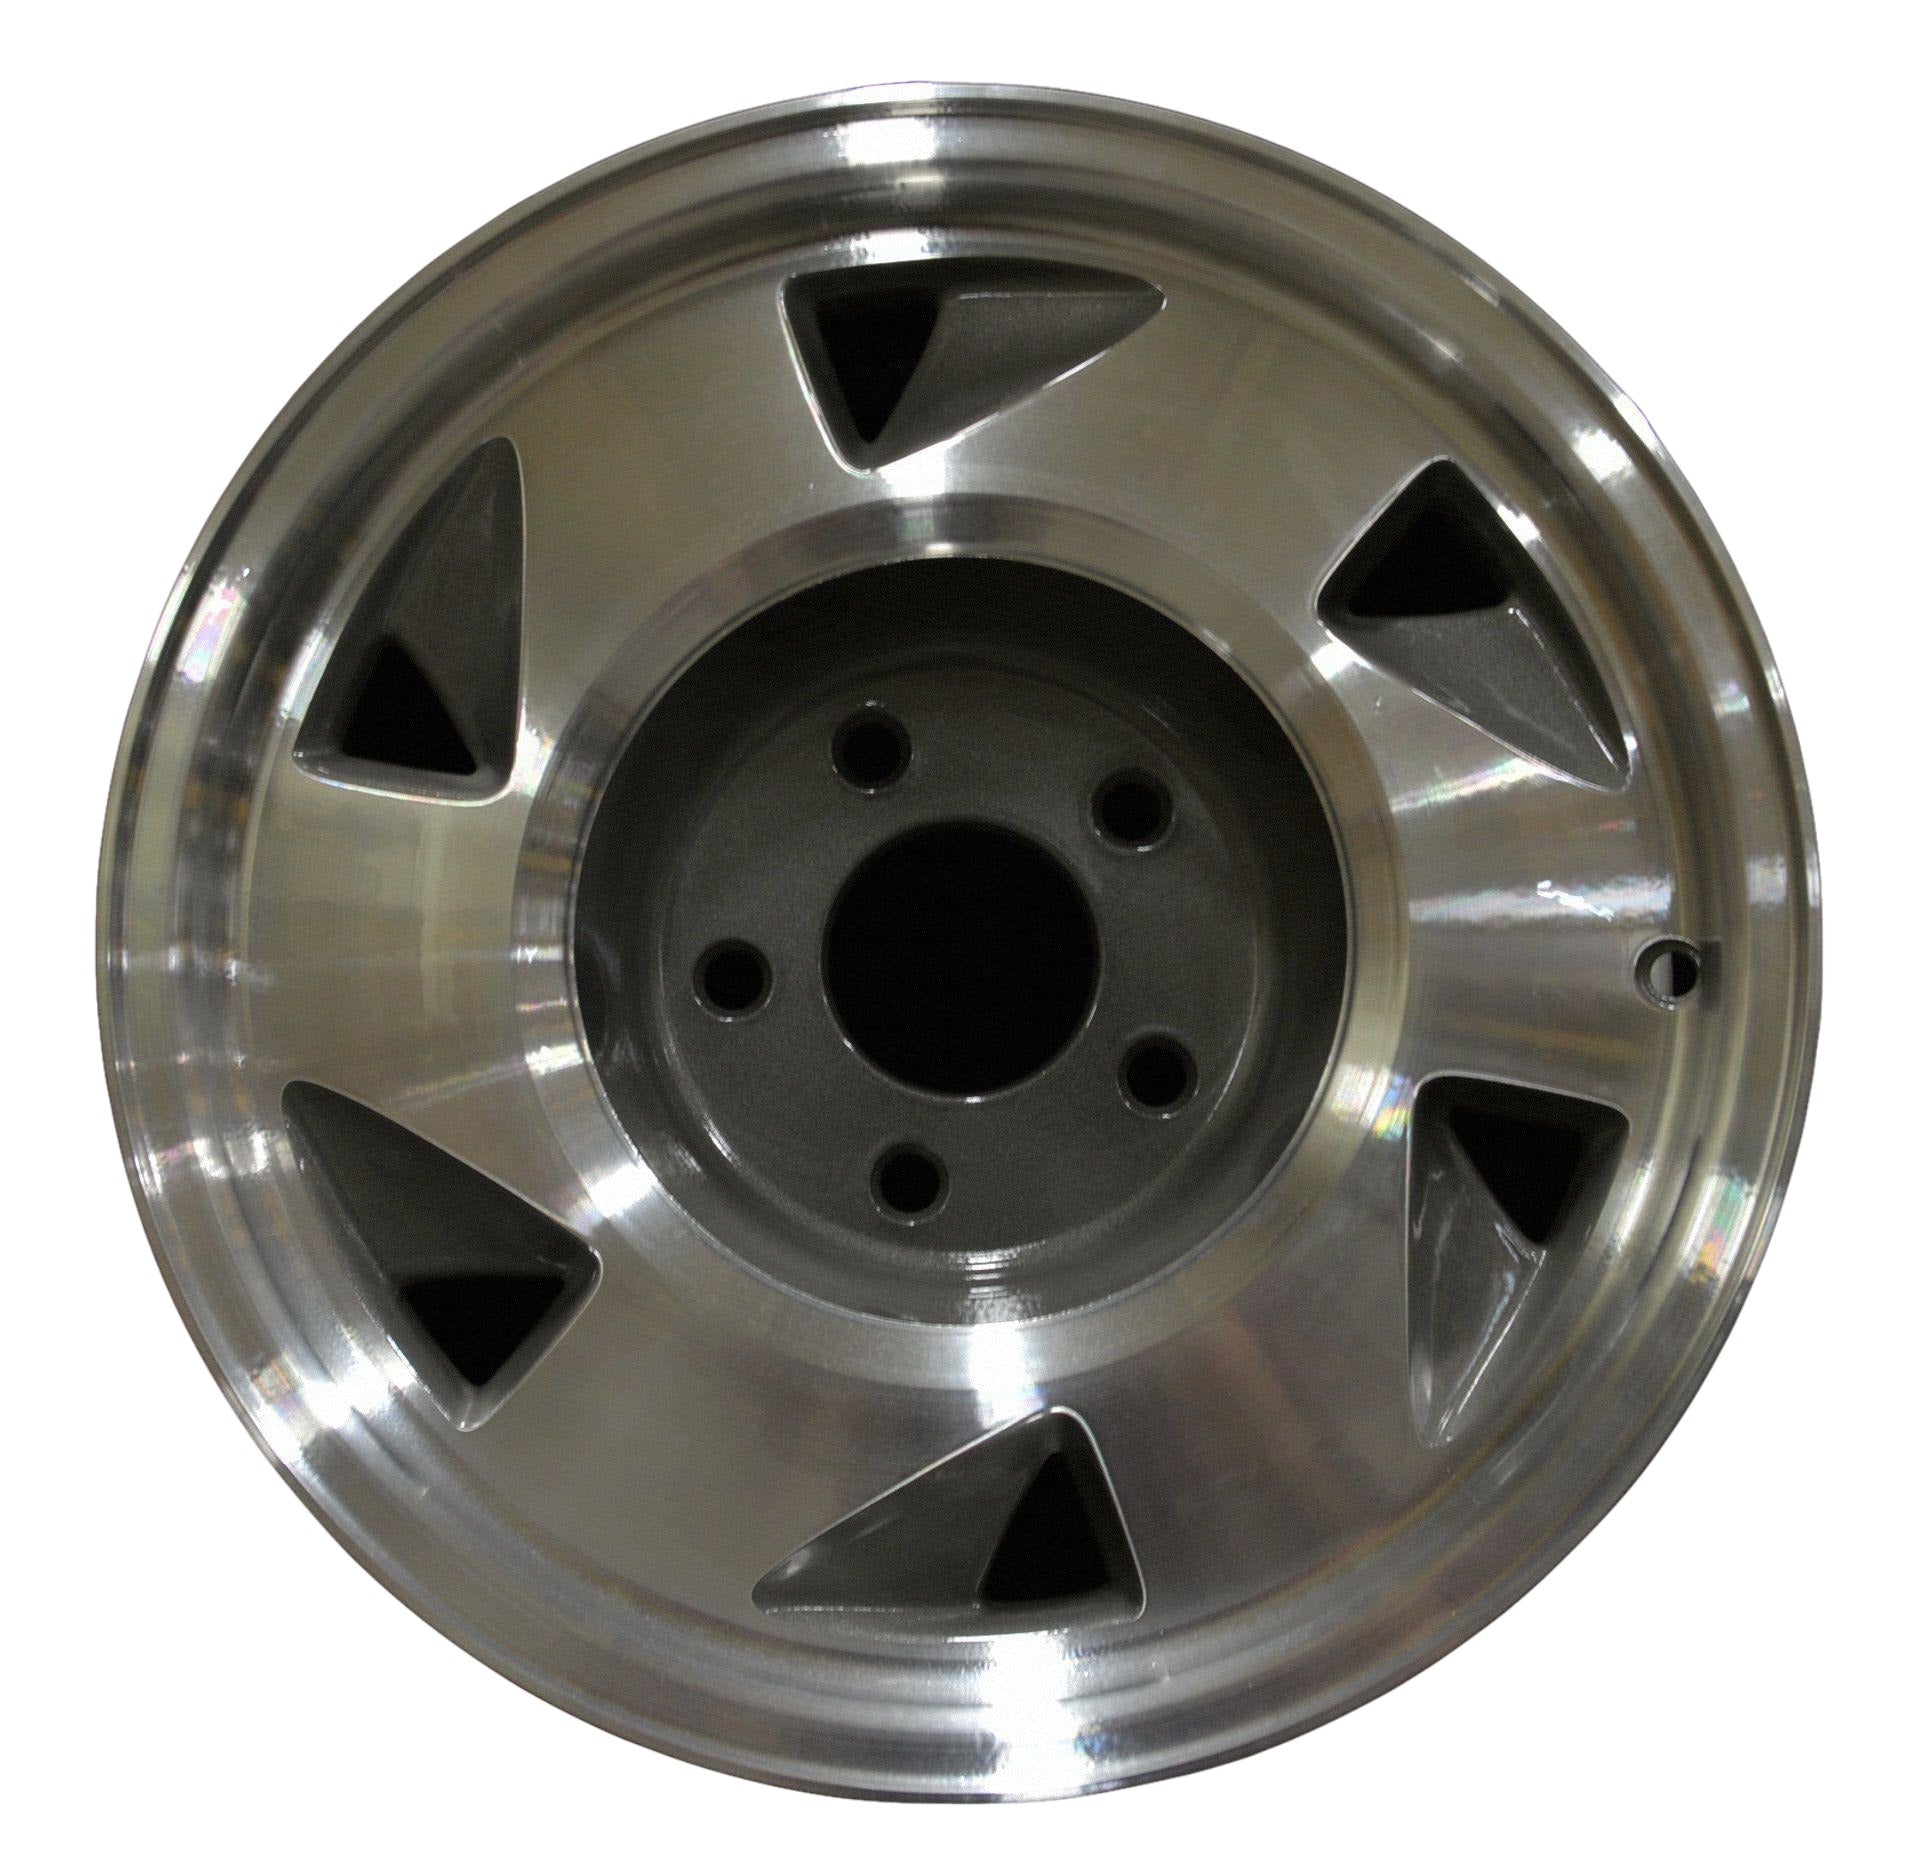 Chevrolet S10 Truck  1994, 1995, 1996, 1997, 1998, 1999, 2000, 2001, 2002, 2003 Factory OEM Car Wheel Size 15x7 Alloy WAO.5029A.PC17.MA